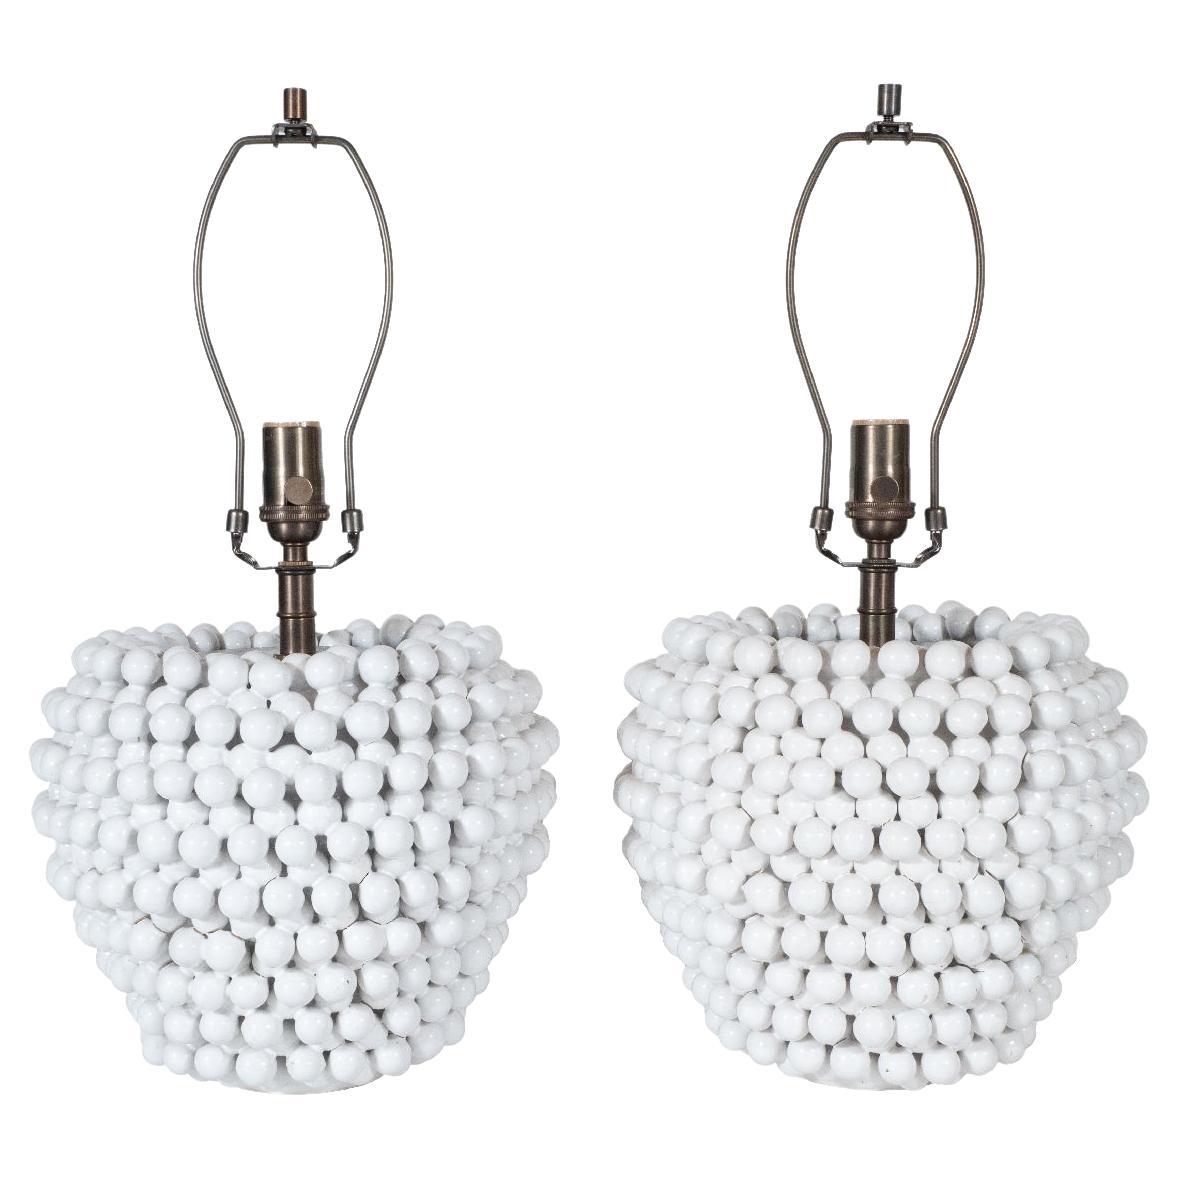 Pair of Clustered Ball Ceramic Table Lamps